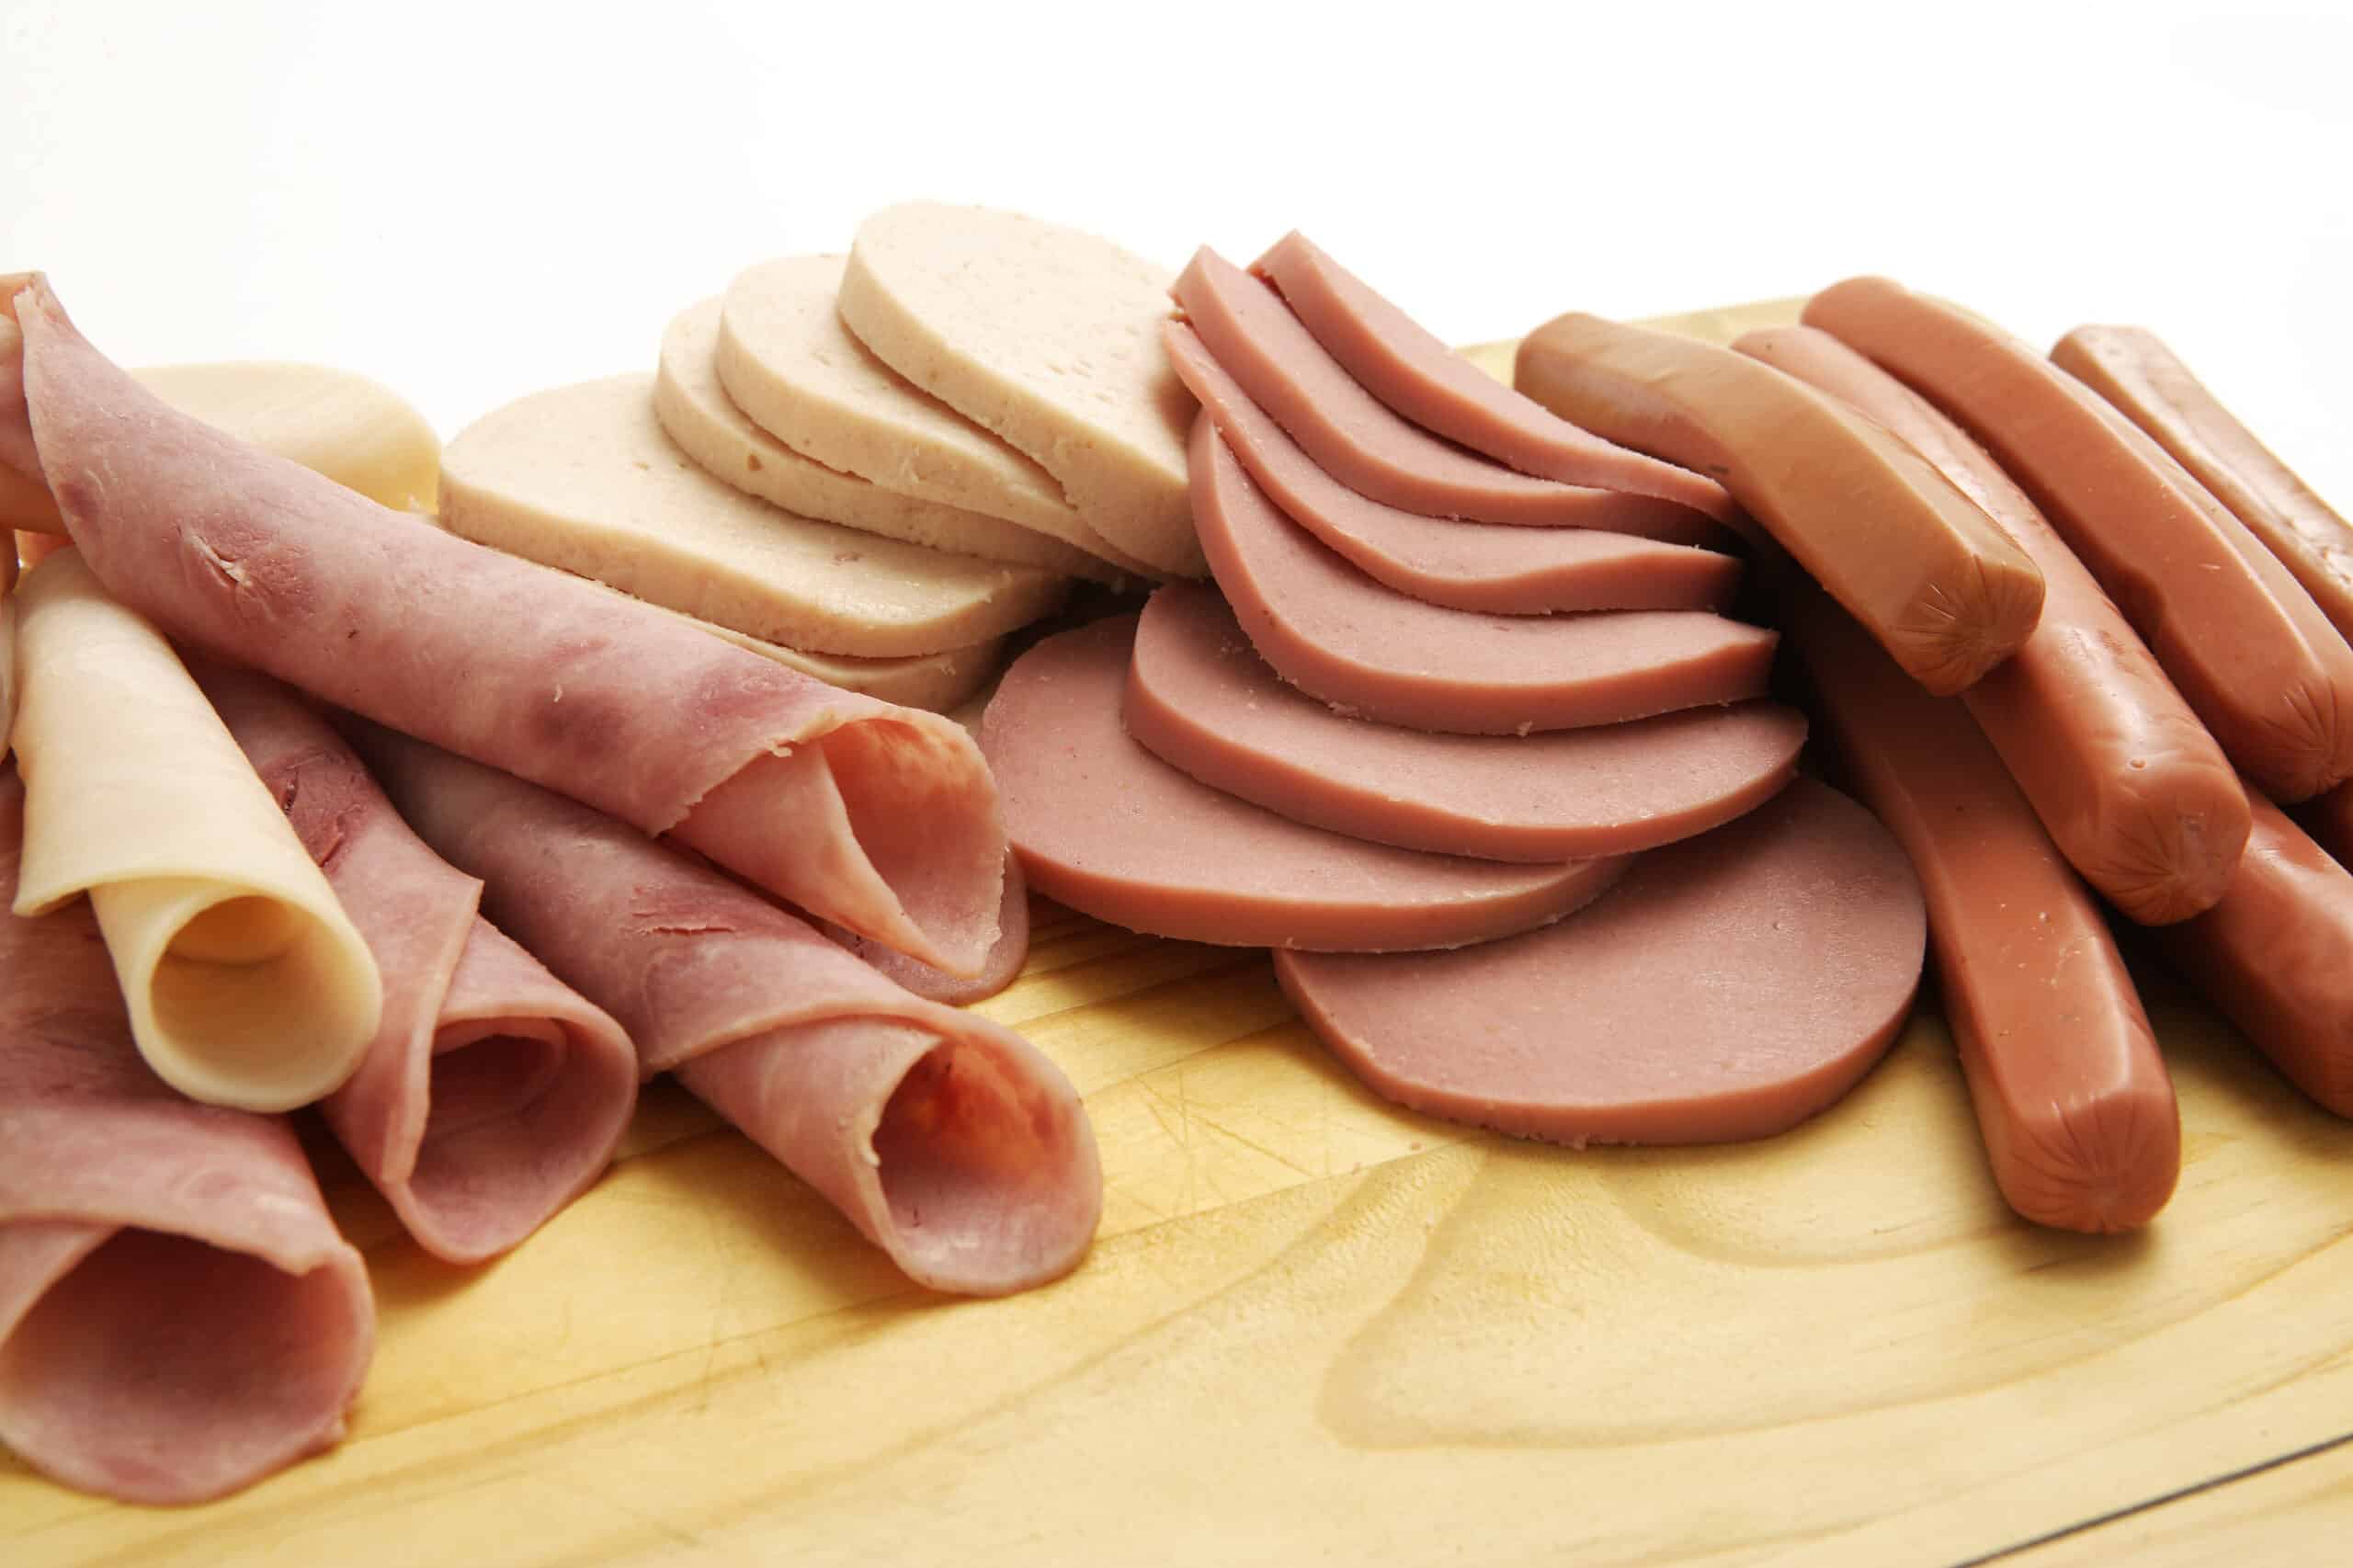 americans are still eating too much processed meat despite health risks scaled